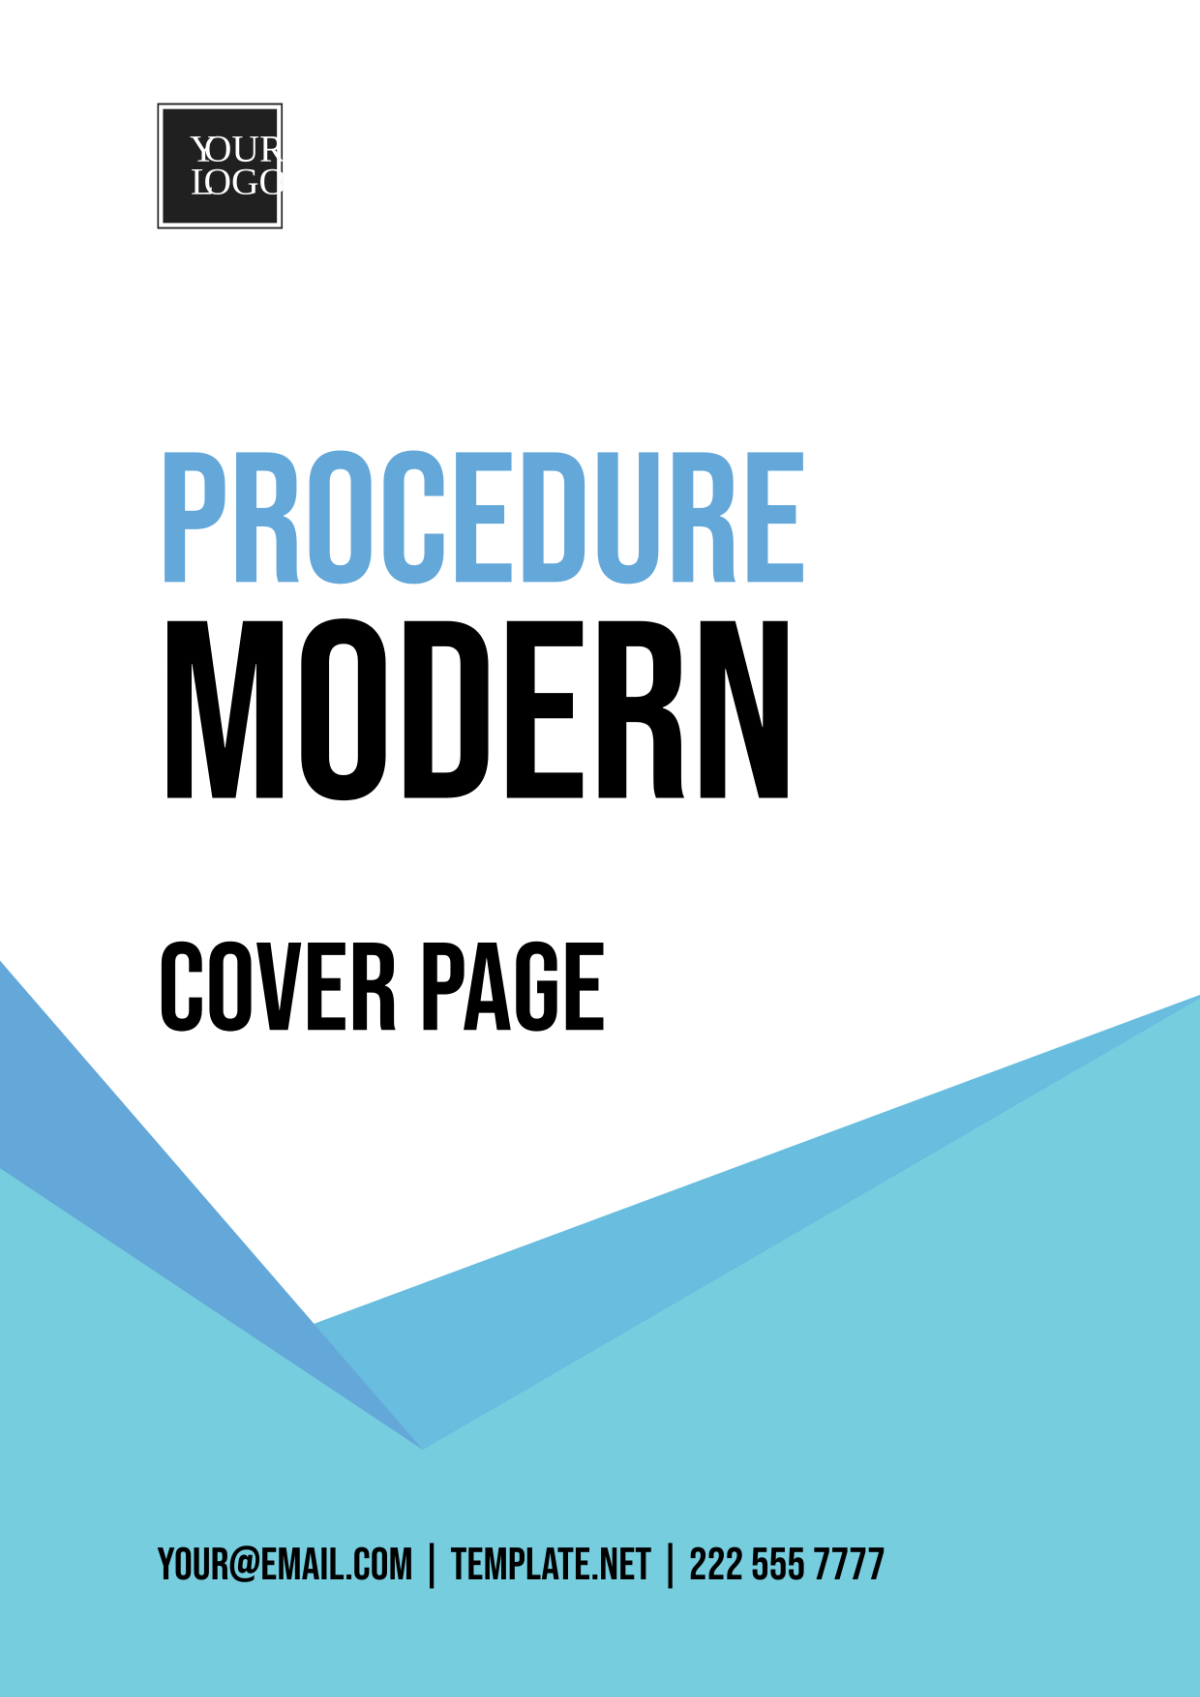 Procedure Modern Cover Page Template